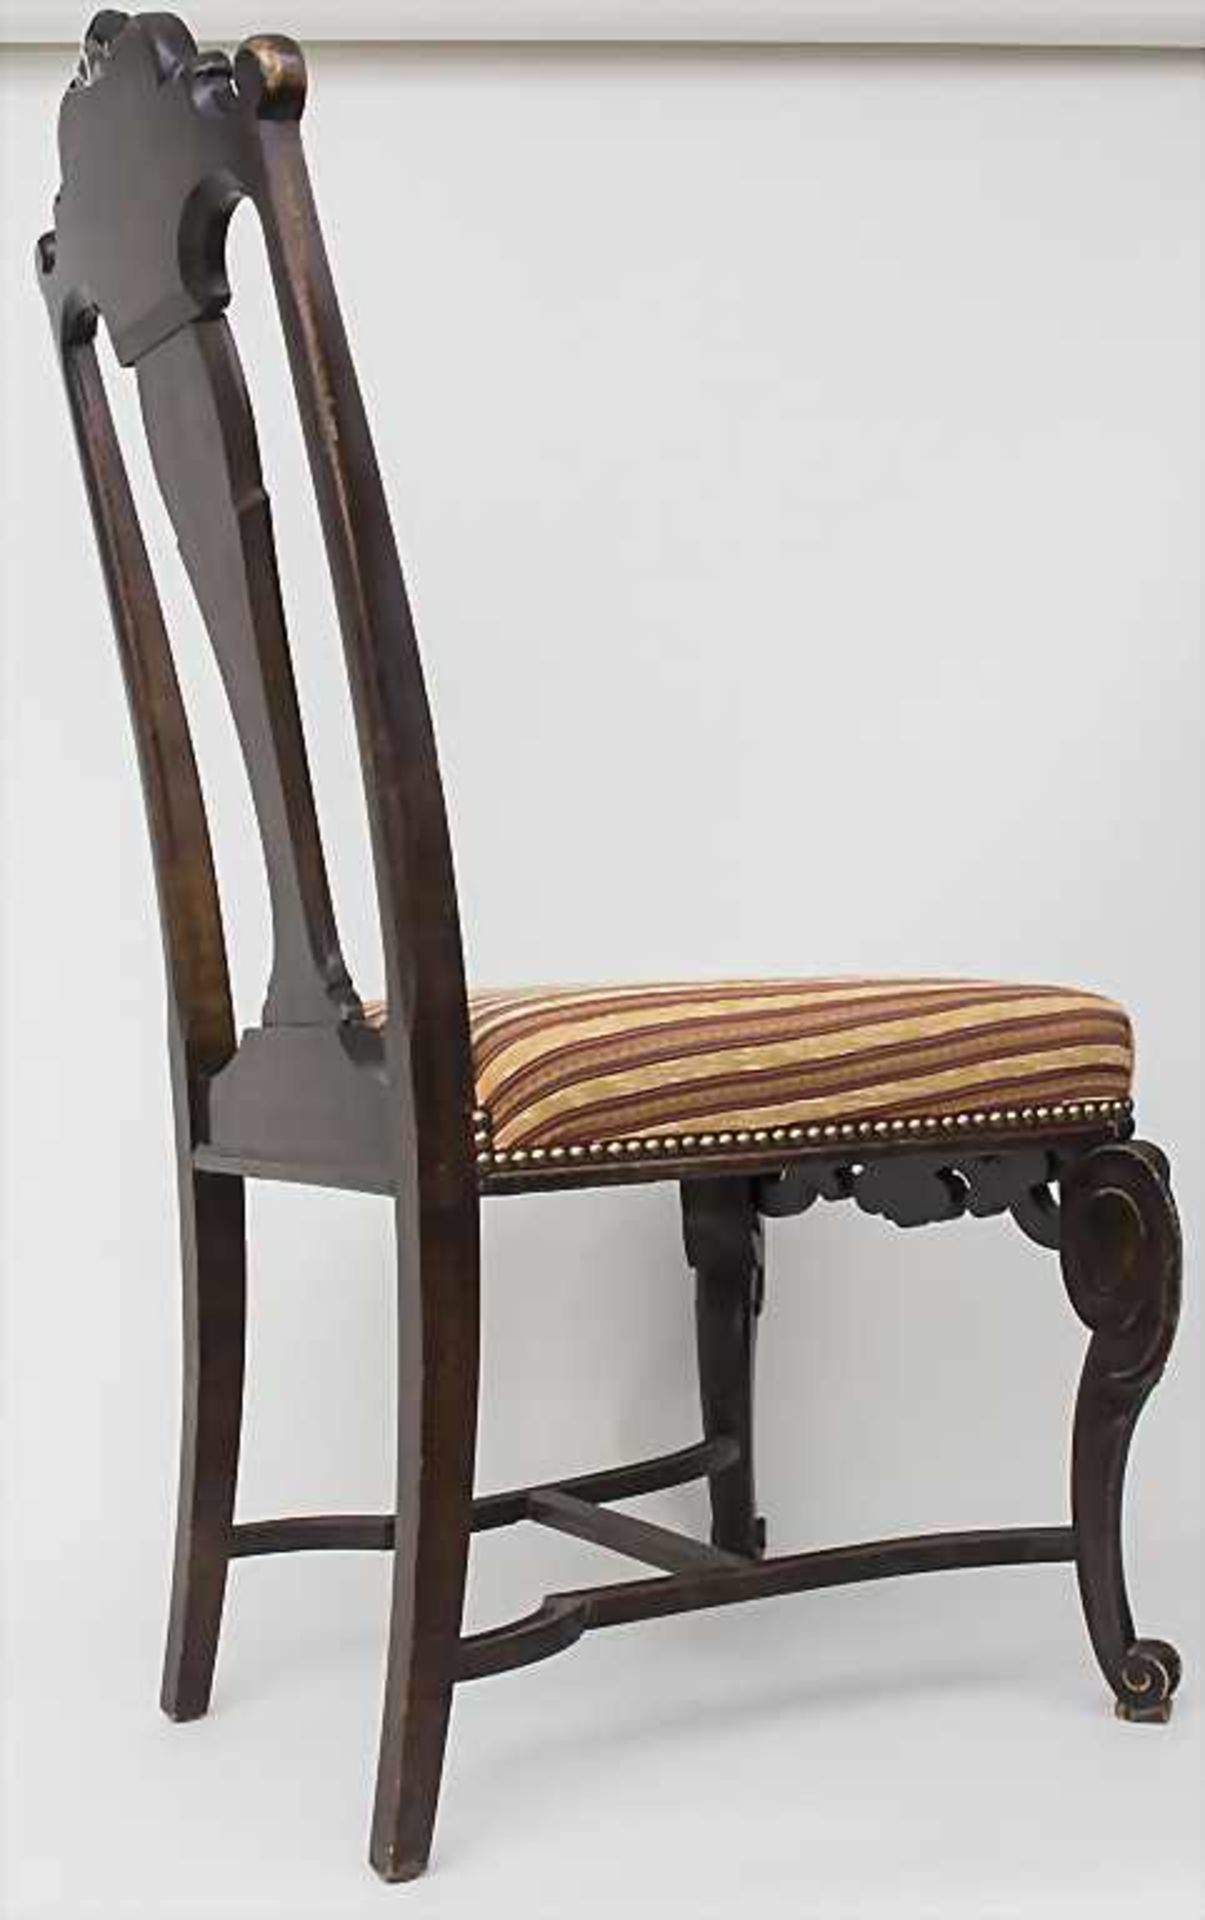 Paar Historismus-Stühle / A pair of historism chairs, 19. Jh. - Image 3 of 5